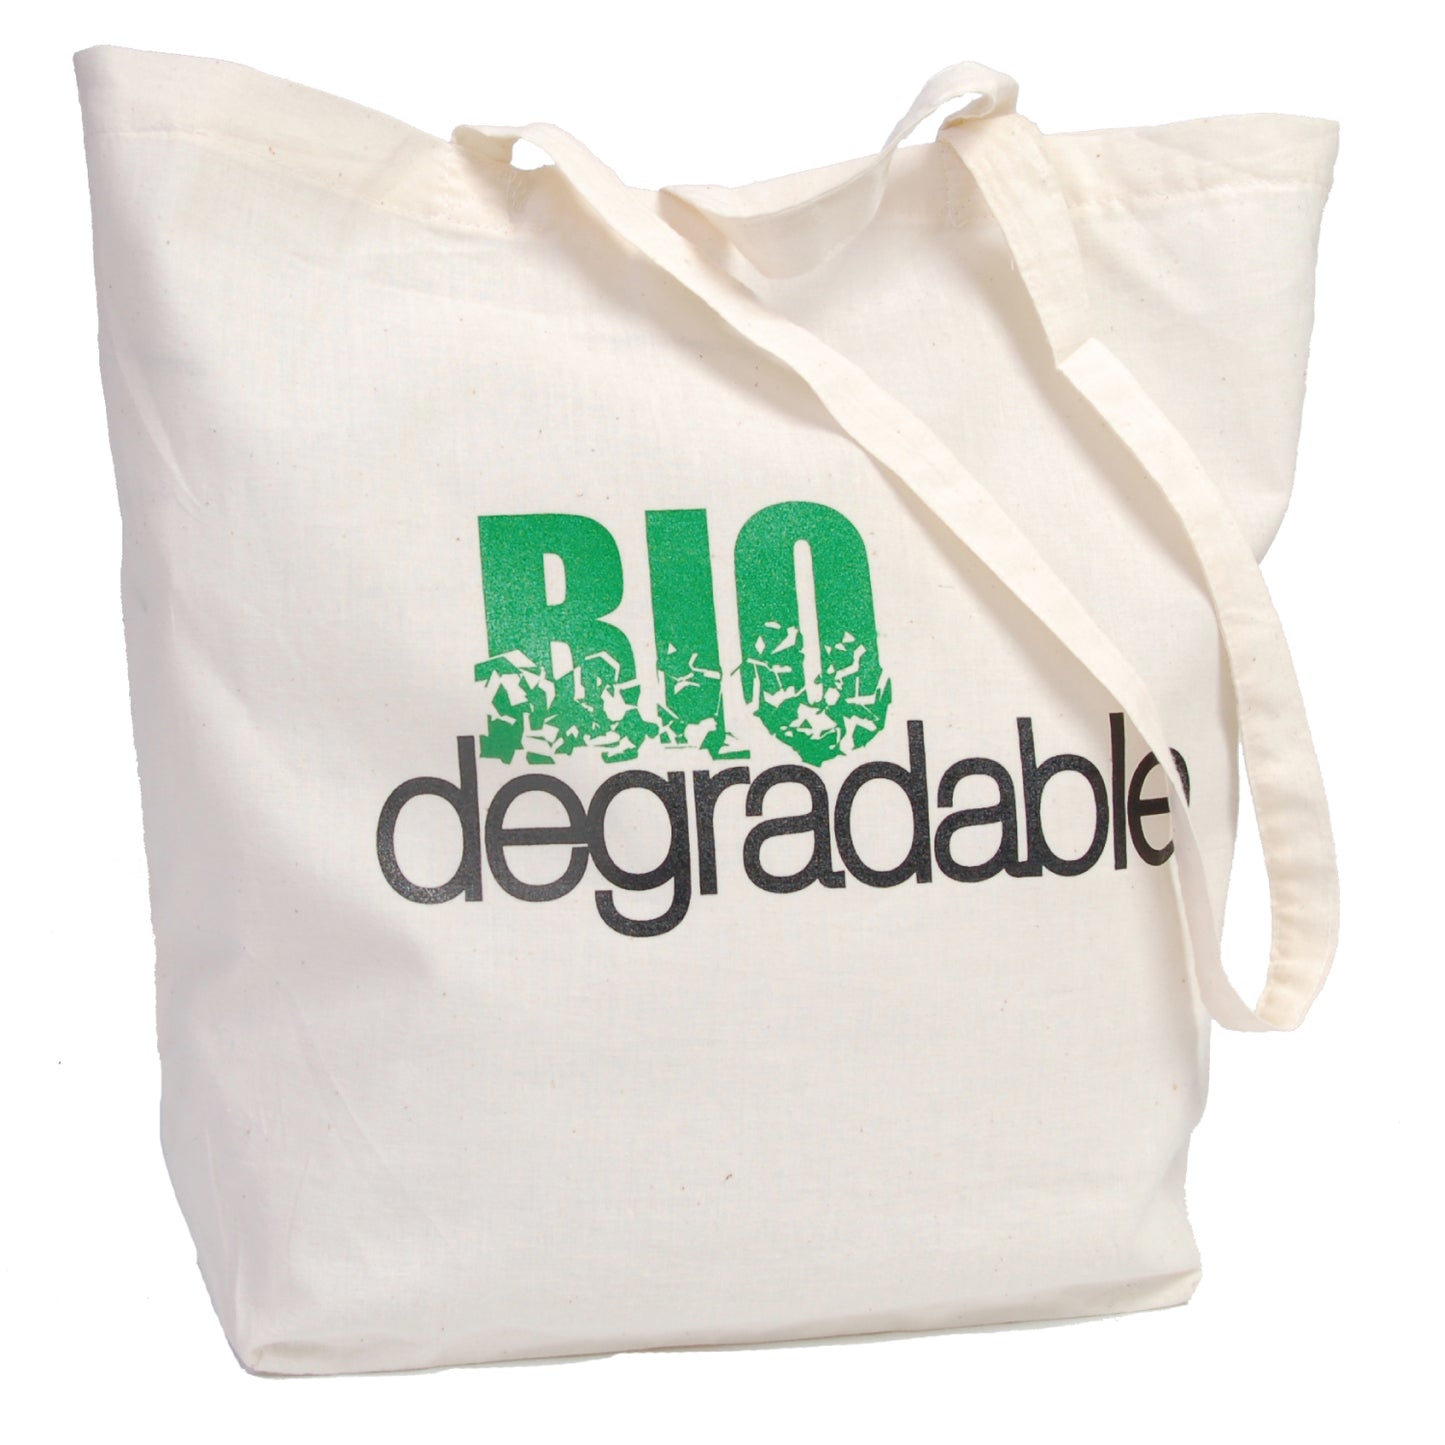 Shop custom cotton tote bags, bulk reusable totes at bargain prices. Durable, sustainable shopping bags for eco-friendly promotions.